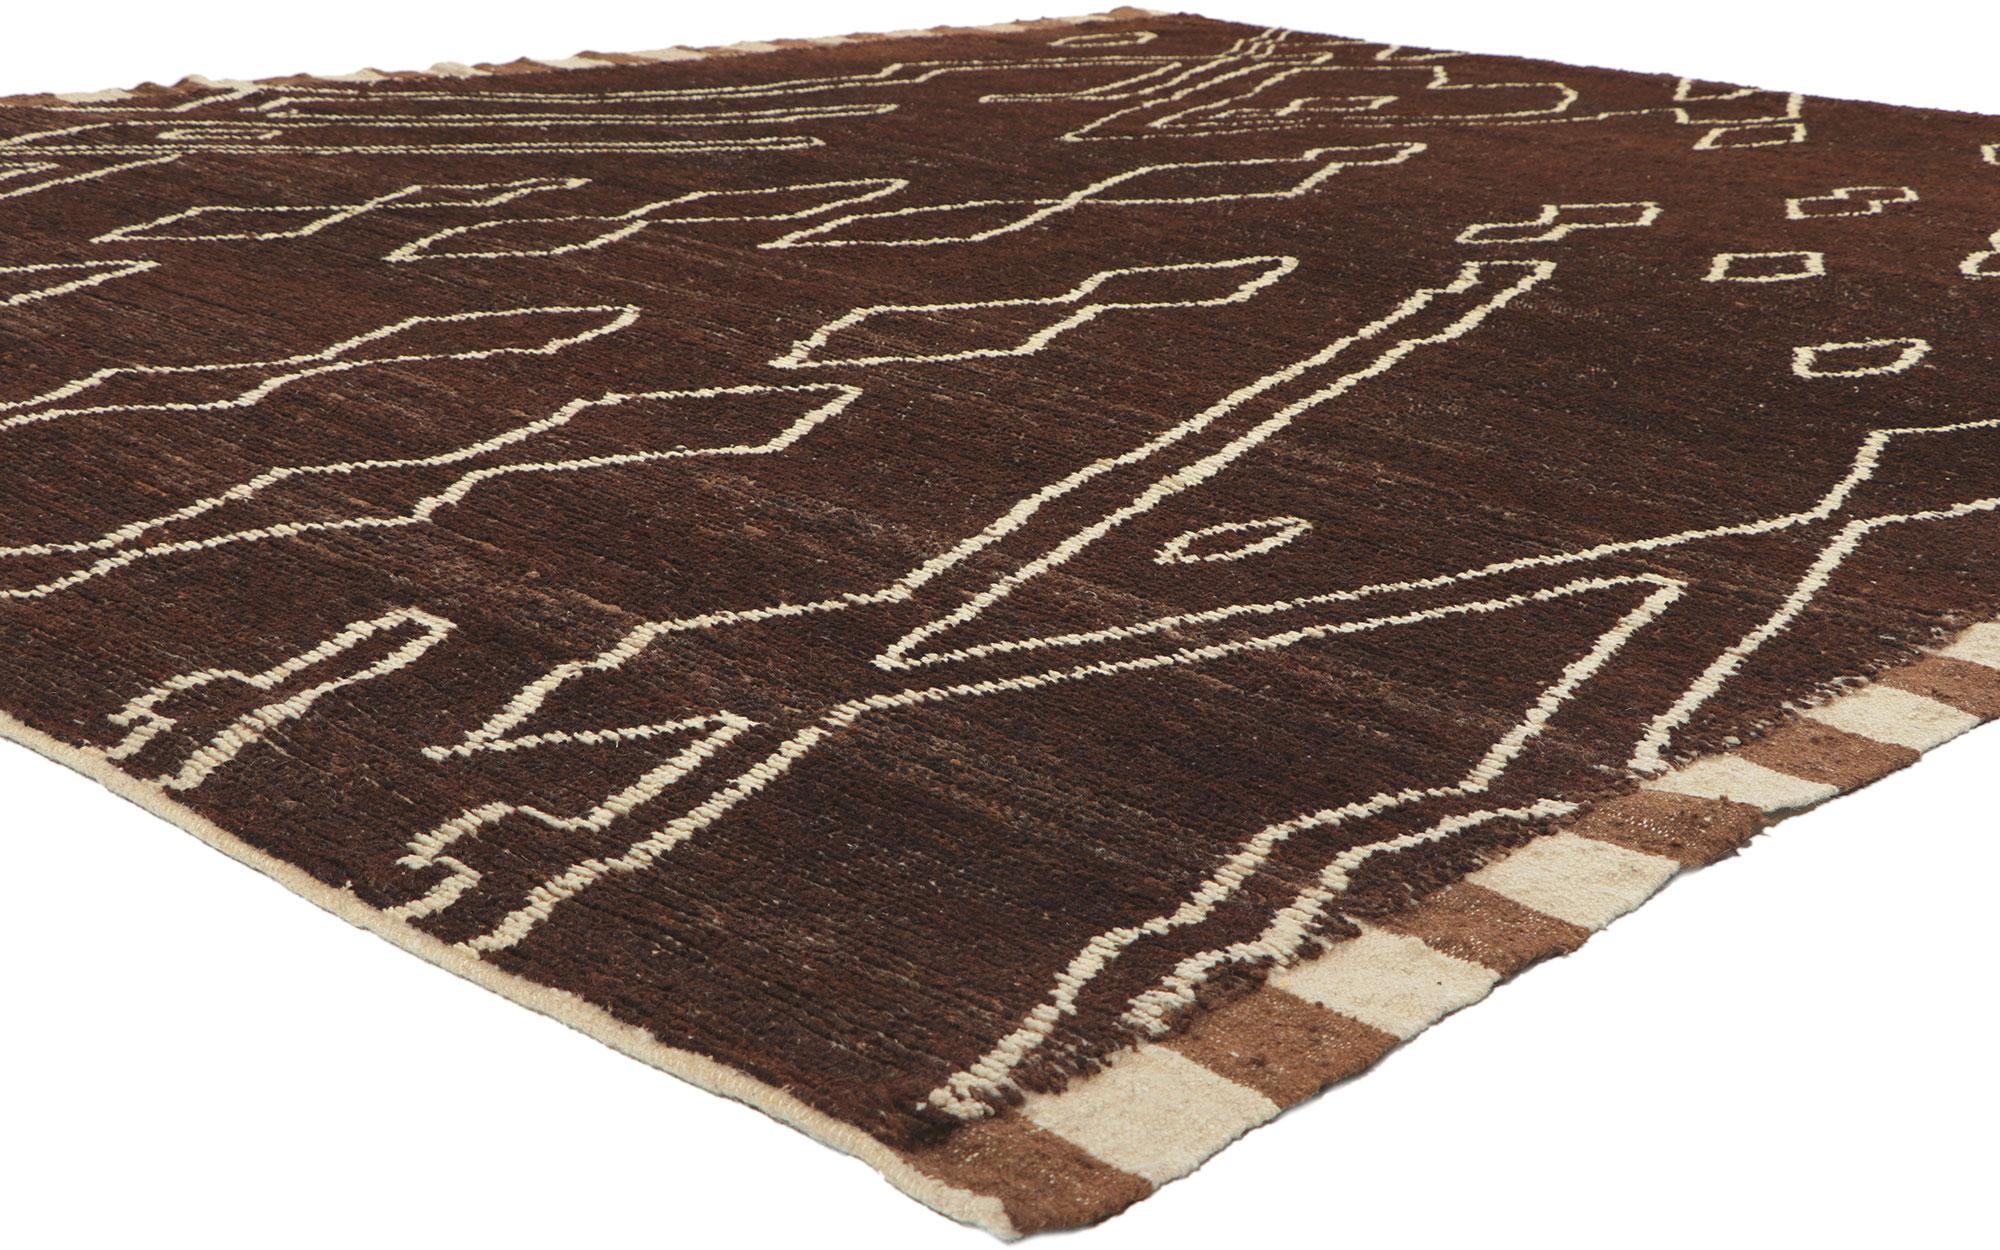 80800 New Contemporary Moroccan Rug with Nomadic Charm, 09'02 x 11'02. Showcasing an expressive design, incredible detail and texture, this hand knotted wool Moroccan style rug is a captivating vision of woven beauty. The eye-catching tribal pattern